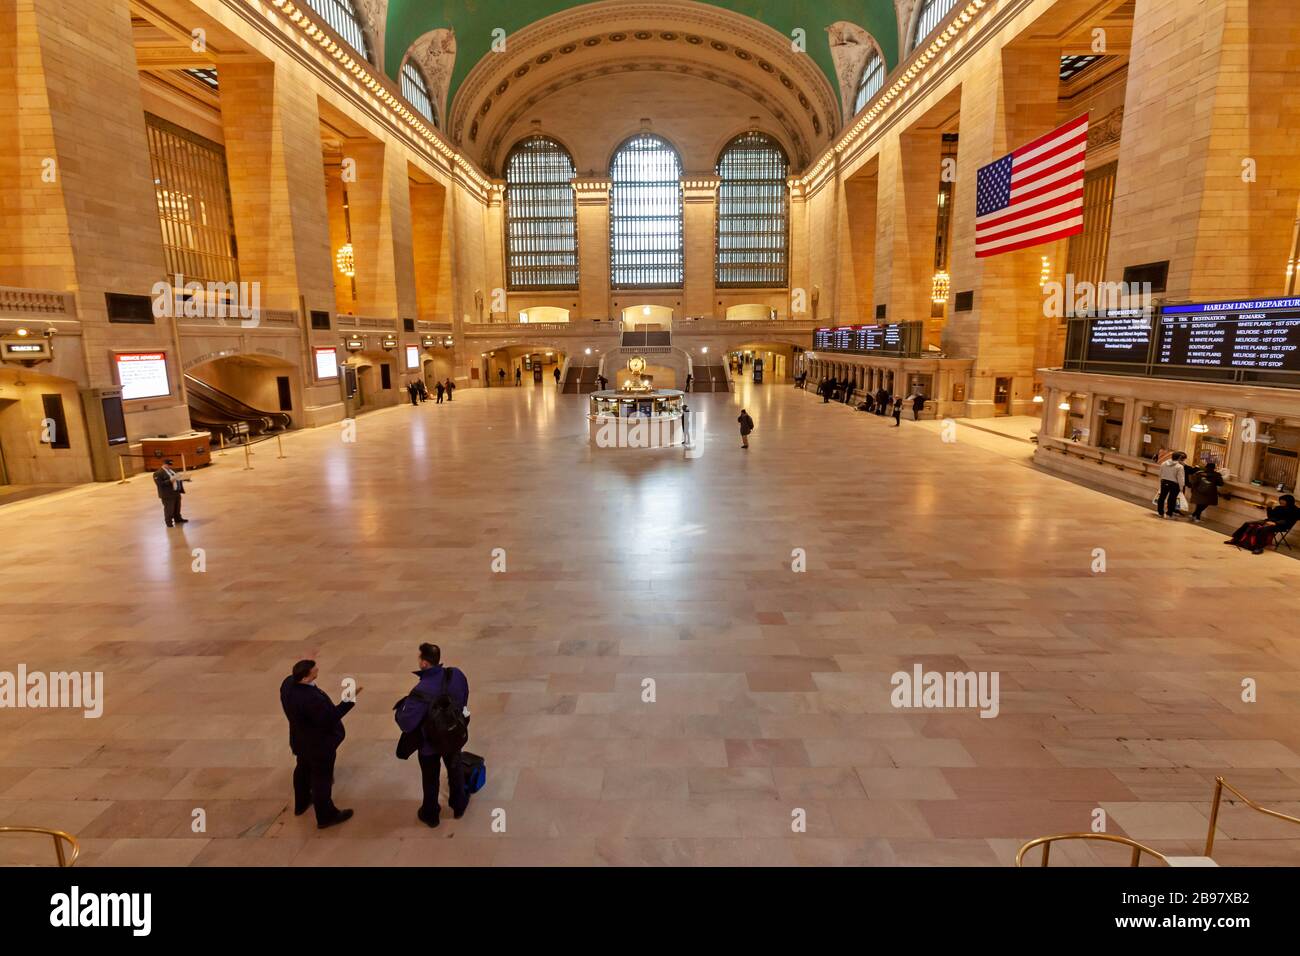 Very few passengers in Grand Central Station in New York City because of COVID-19, Coronavirus. Stock Photo